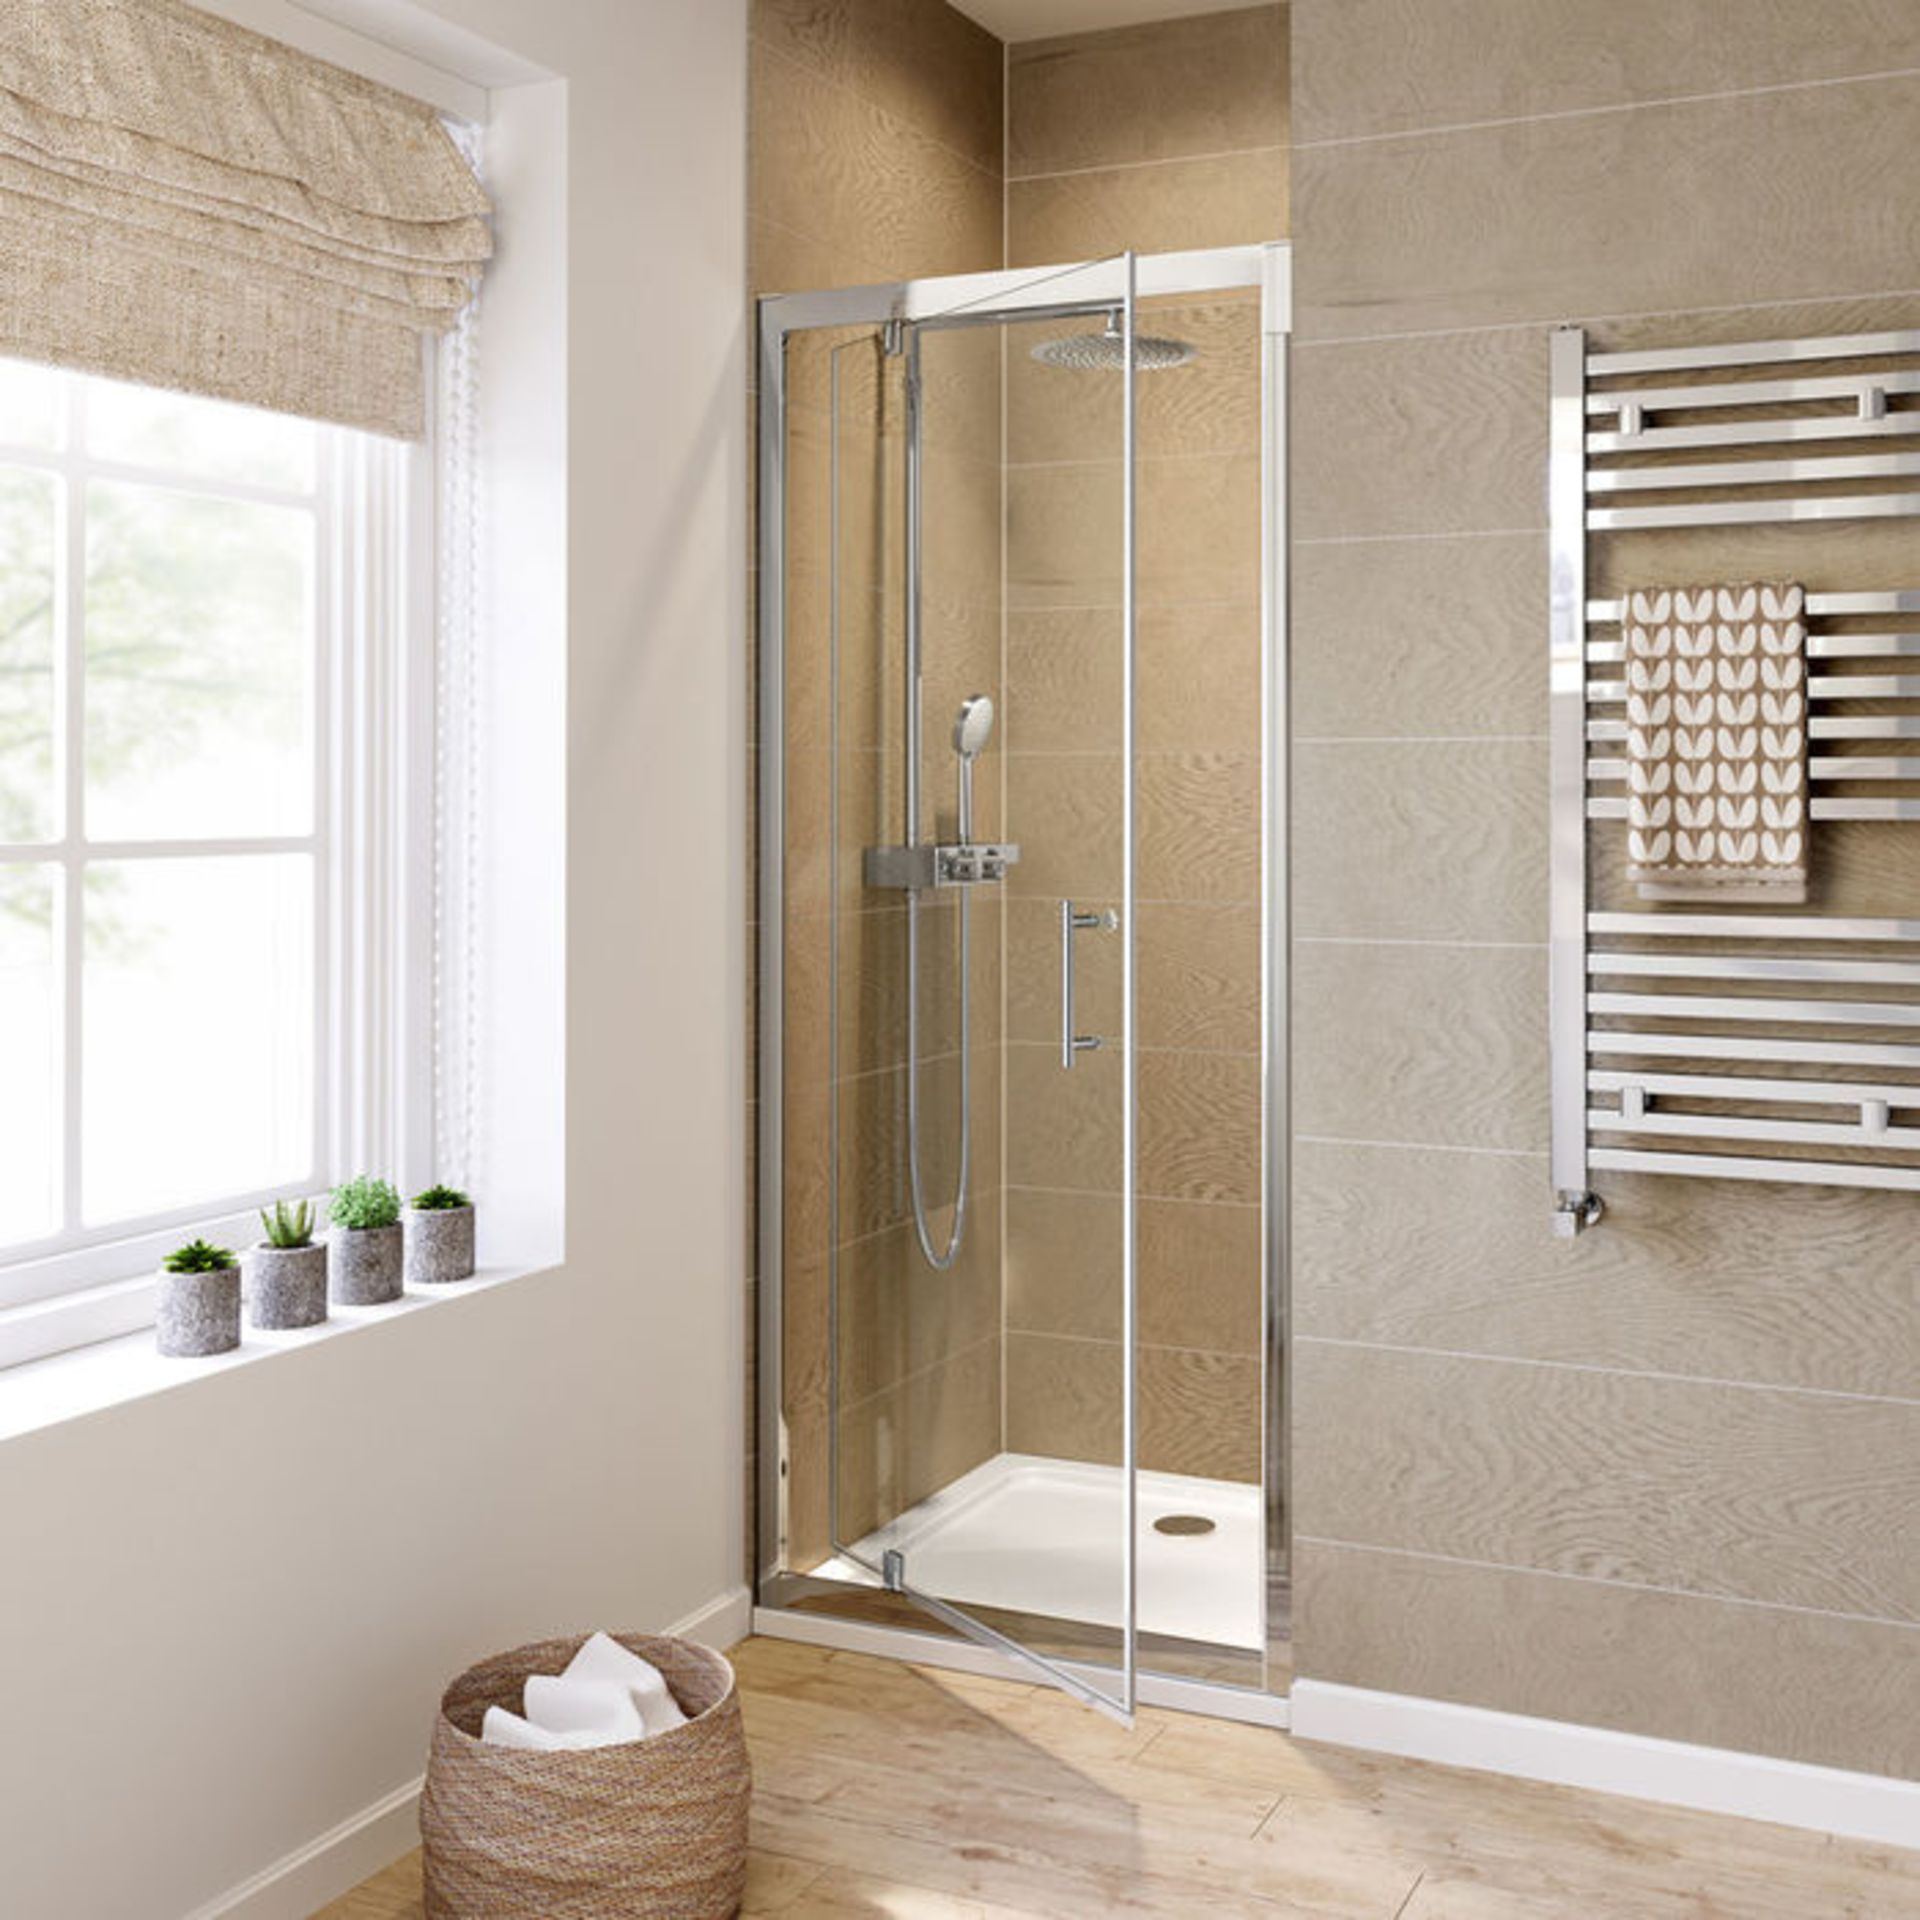 New Twyford's 6mm - Elements Pivot 760mm Shower Door 6mm Safety Glass Fully Waterproof Tested P... - Image 3 of 3